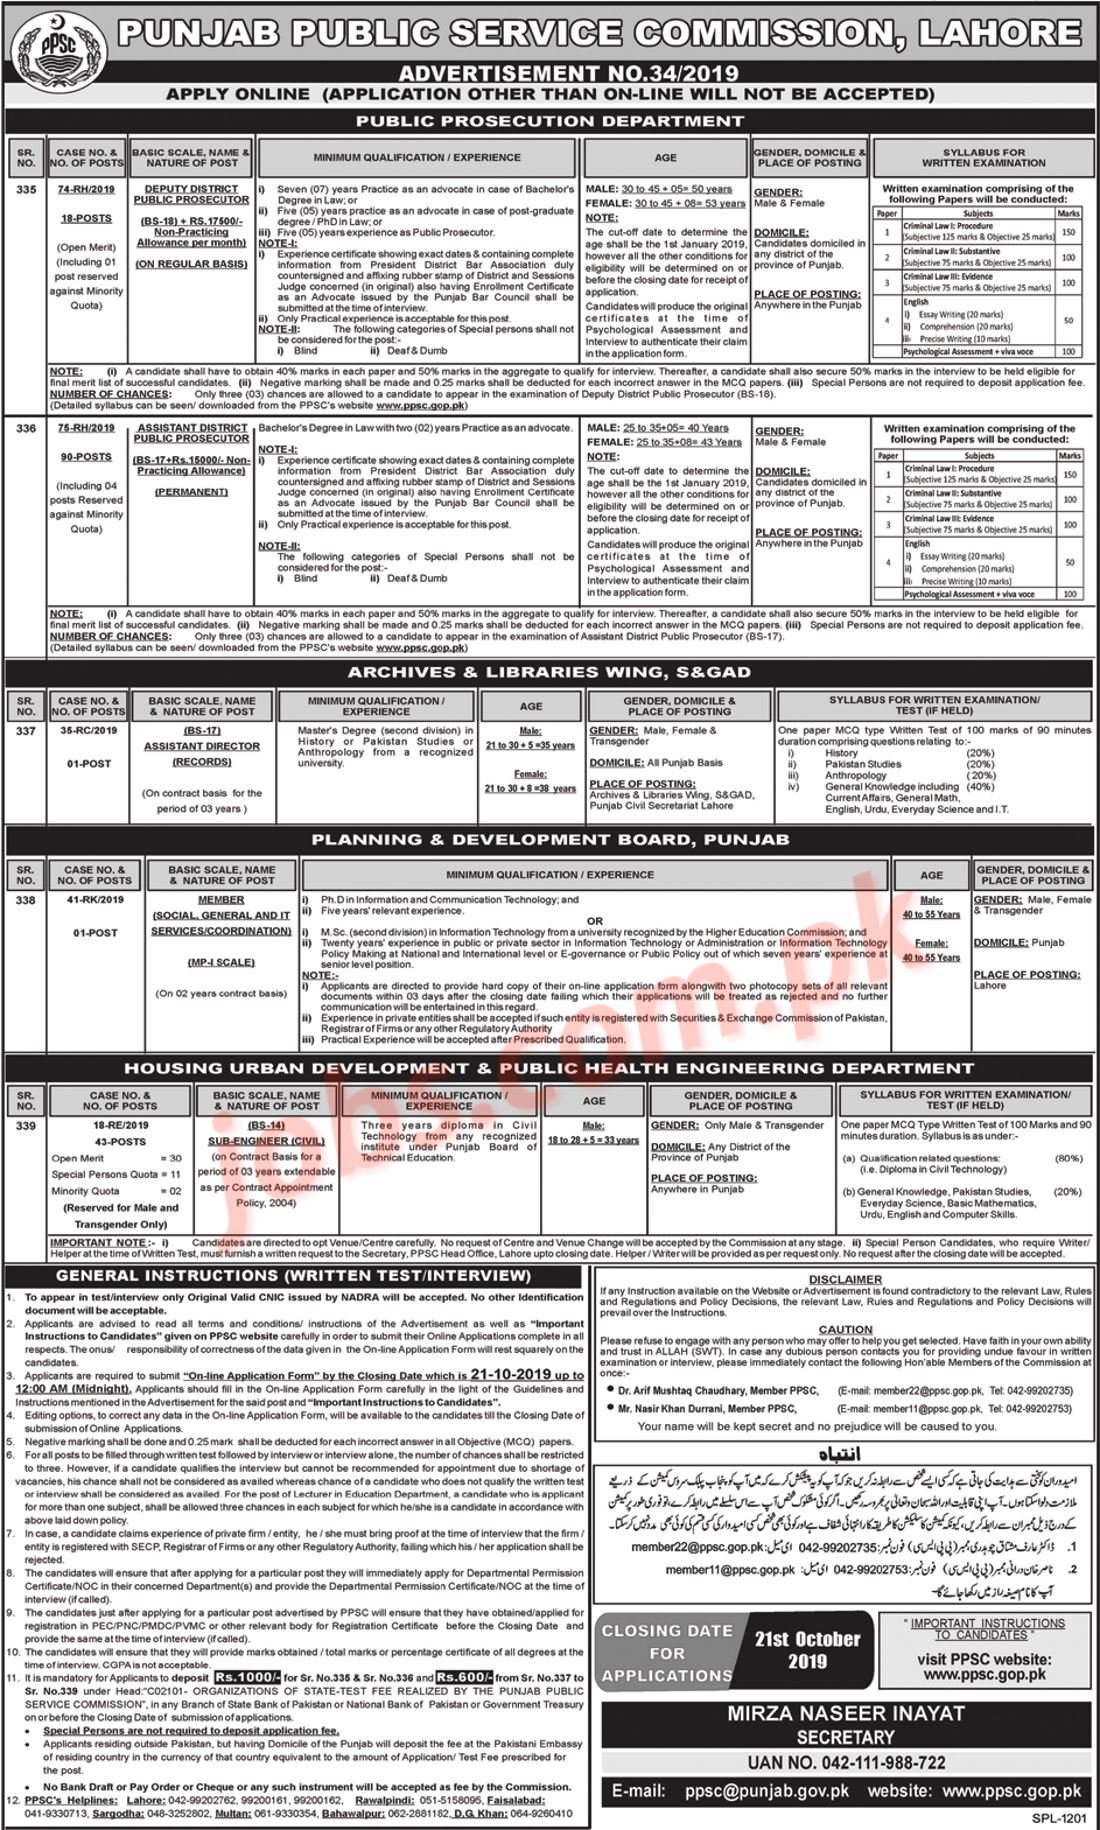 PPSC Jobs (34/2019): 153+ Sub-Engineers, Assistant/Dy Prosecutors & Other Posts In Punjab Government